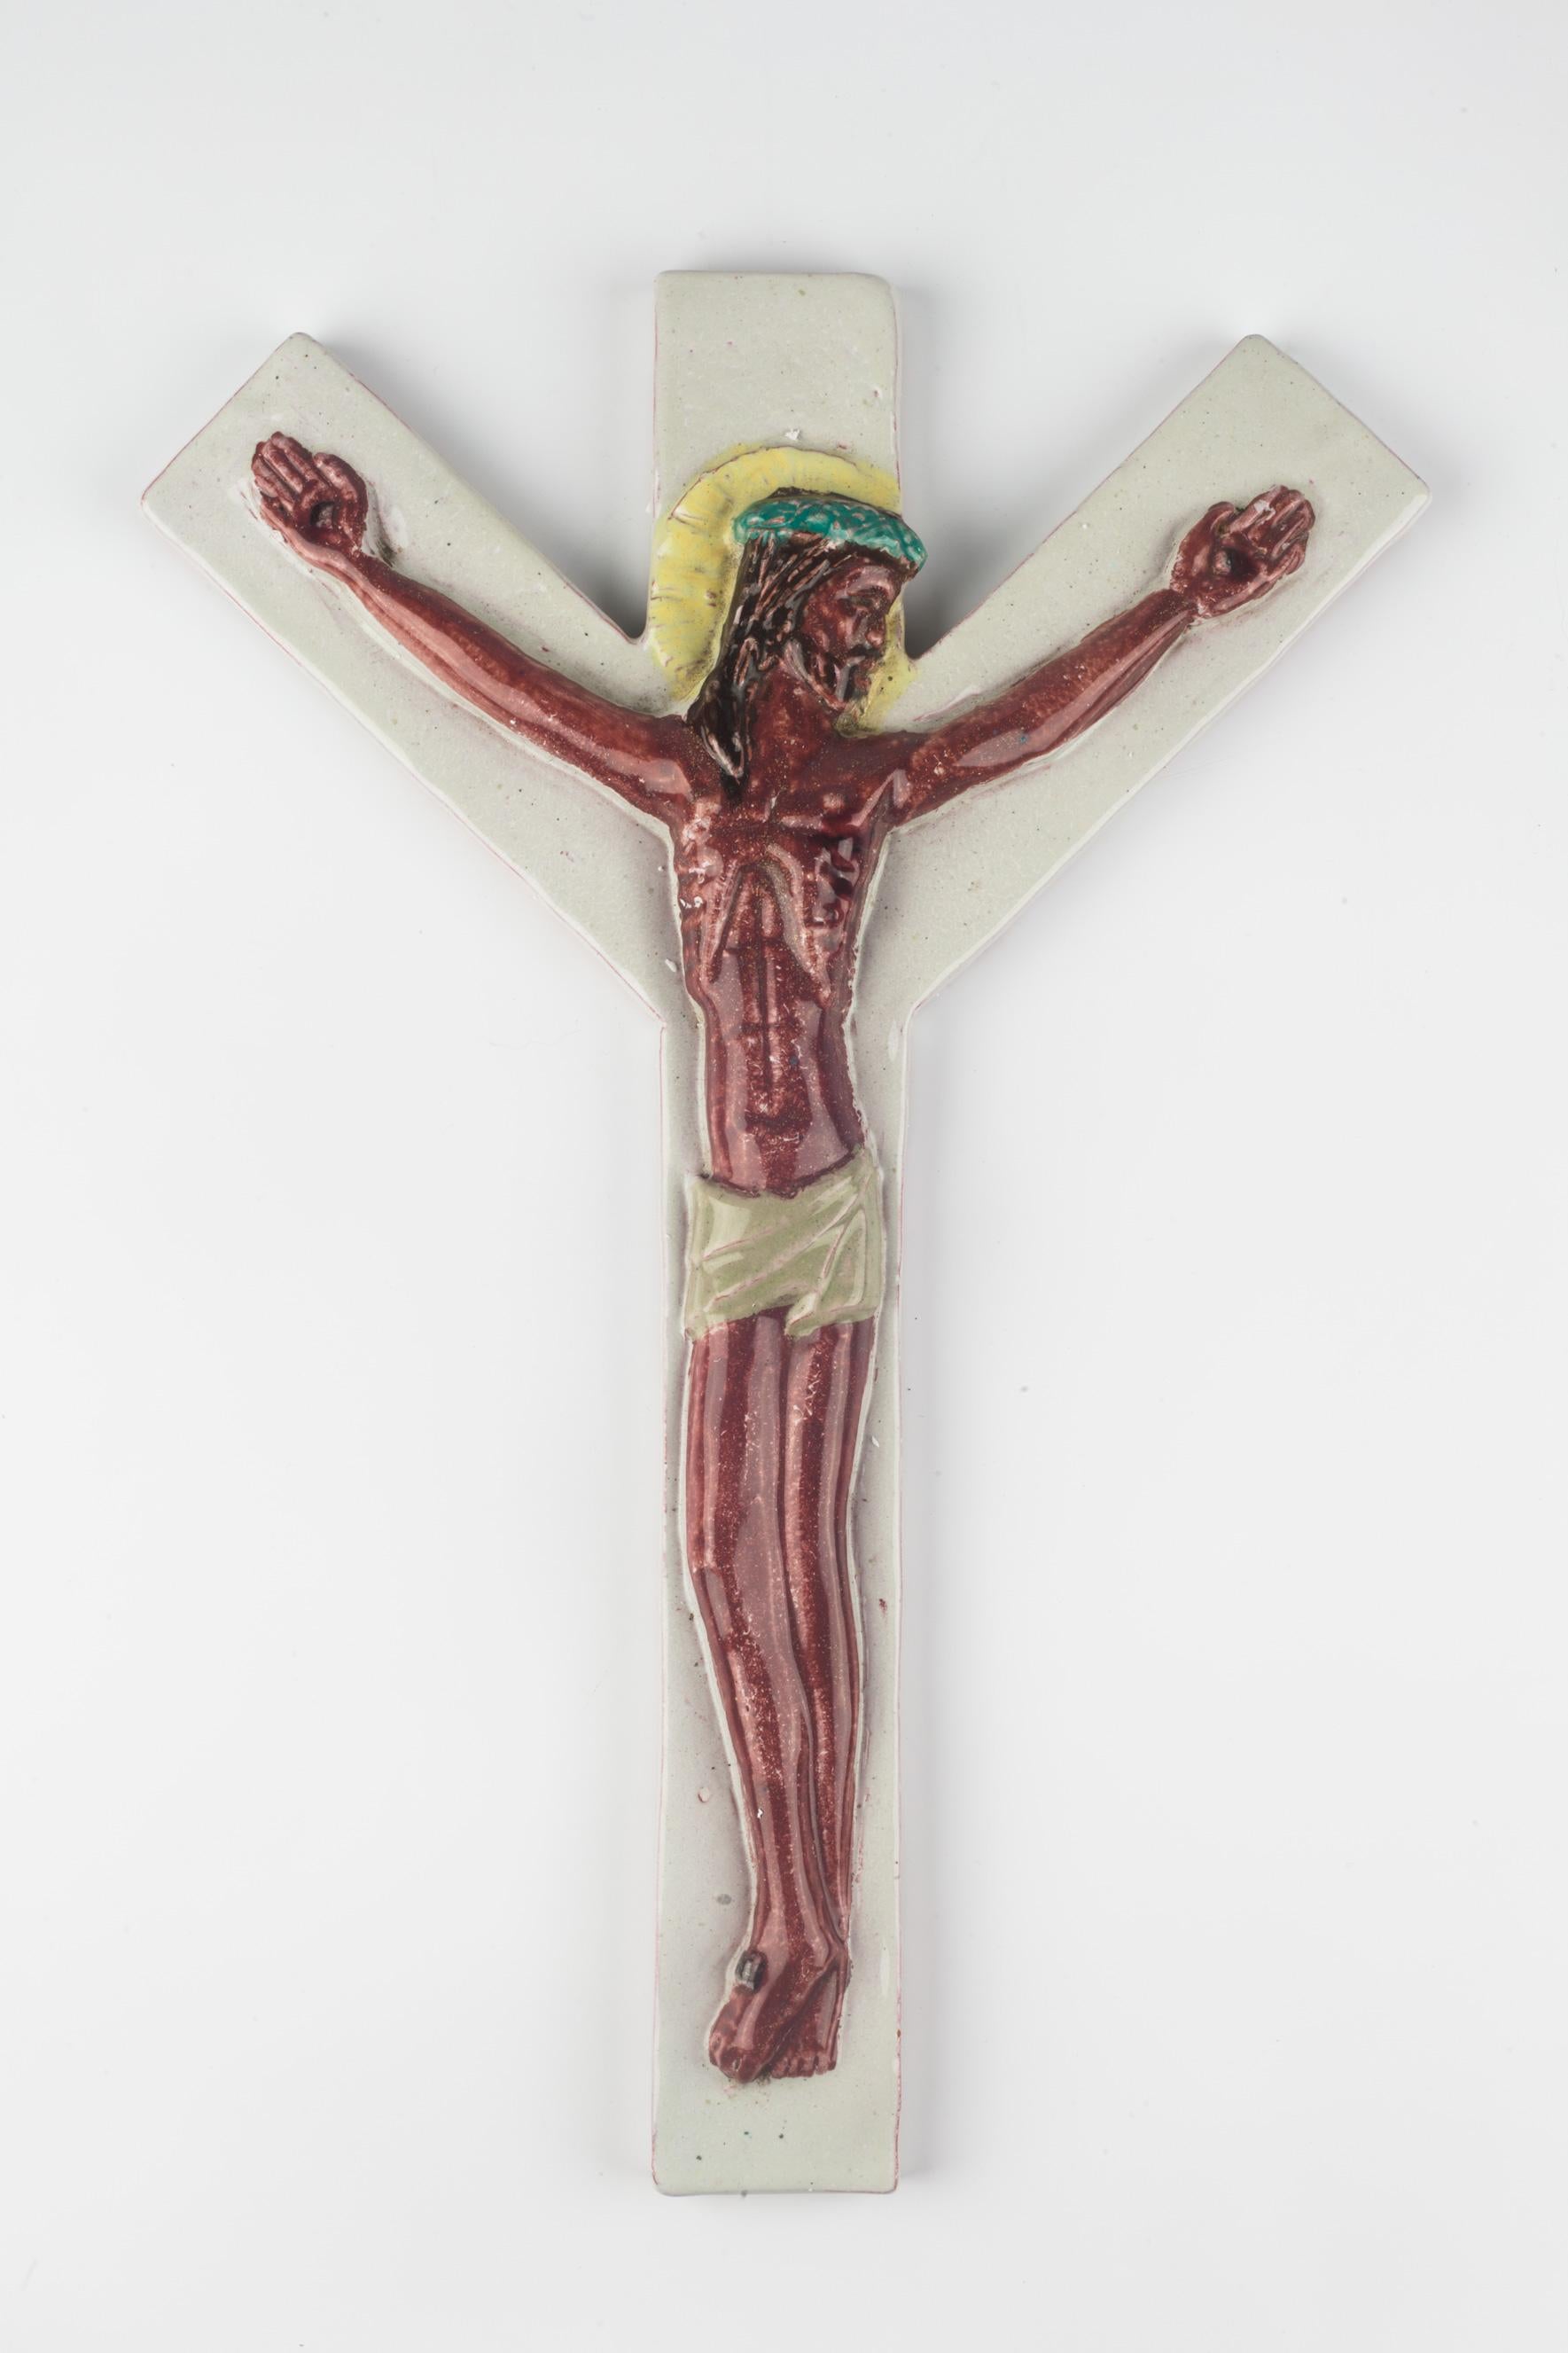 Large ceramic crucifix, over thirteen inches tall, handmade in Europe in the 1970s. Colorfully hand-painted in brown, yellow, turquoise and white, with a highly detailed figurative Christ. A one-of-a-kind, handcrafted piece that is part of a large